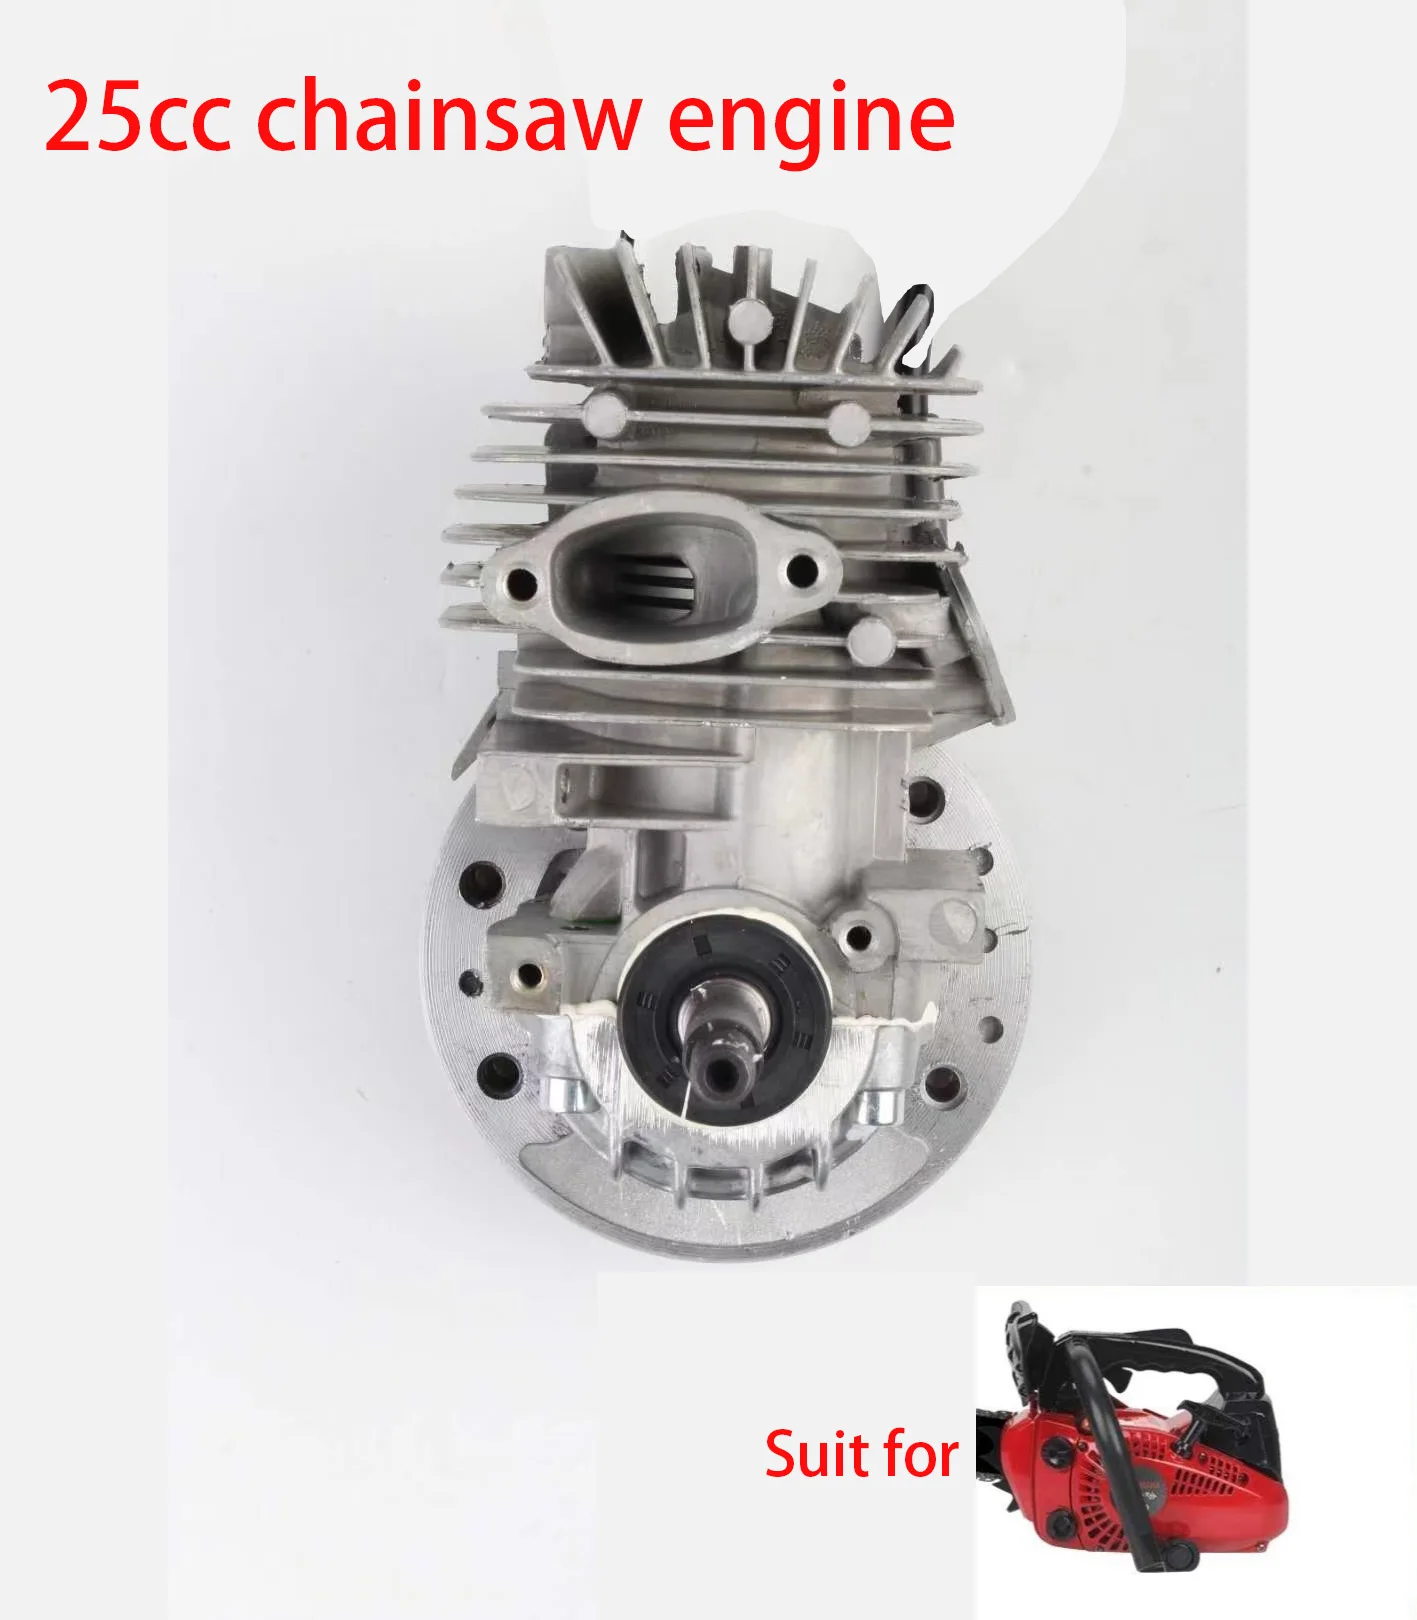 Whole Complete Engine Motor Cylinder Crankshaft Assembly For 25cc G2500 Top Handle Gasoline Chainsaw Pruner 38mm 1132 030 0402 cylinder piston kit crankshaft assembly replacement for stihl ms170 ms180 018 chainsaw engine motor cylinder